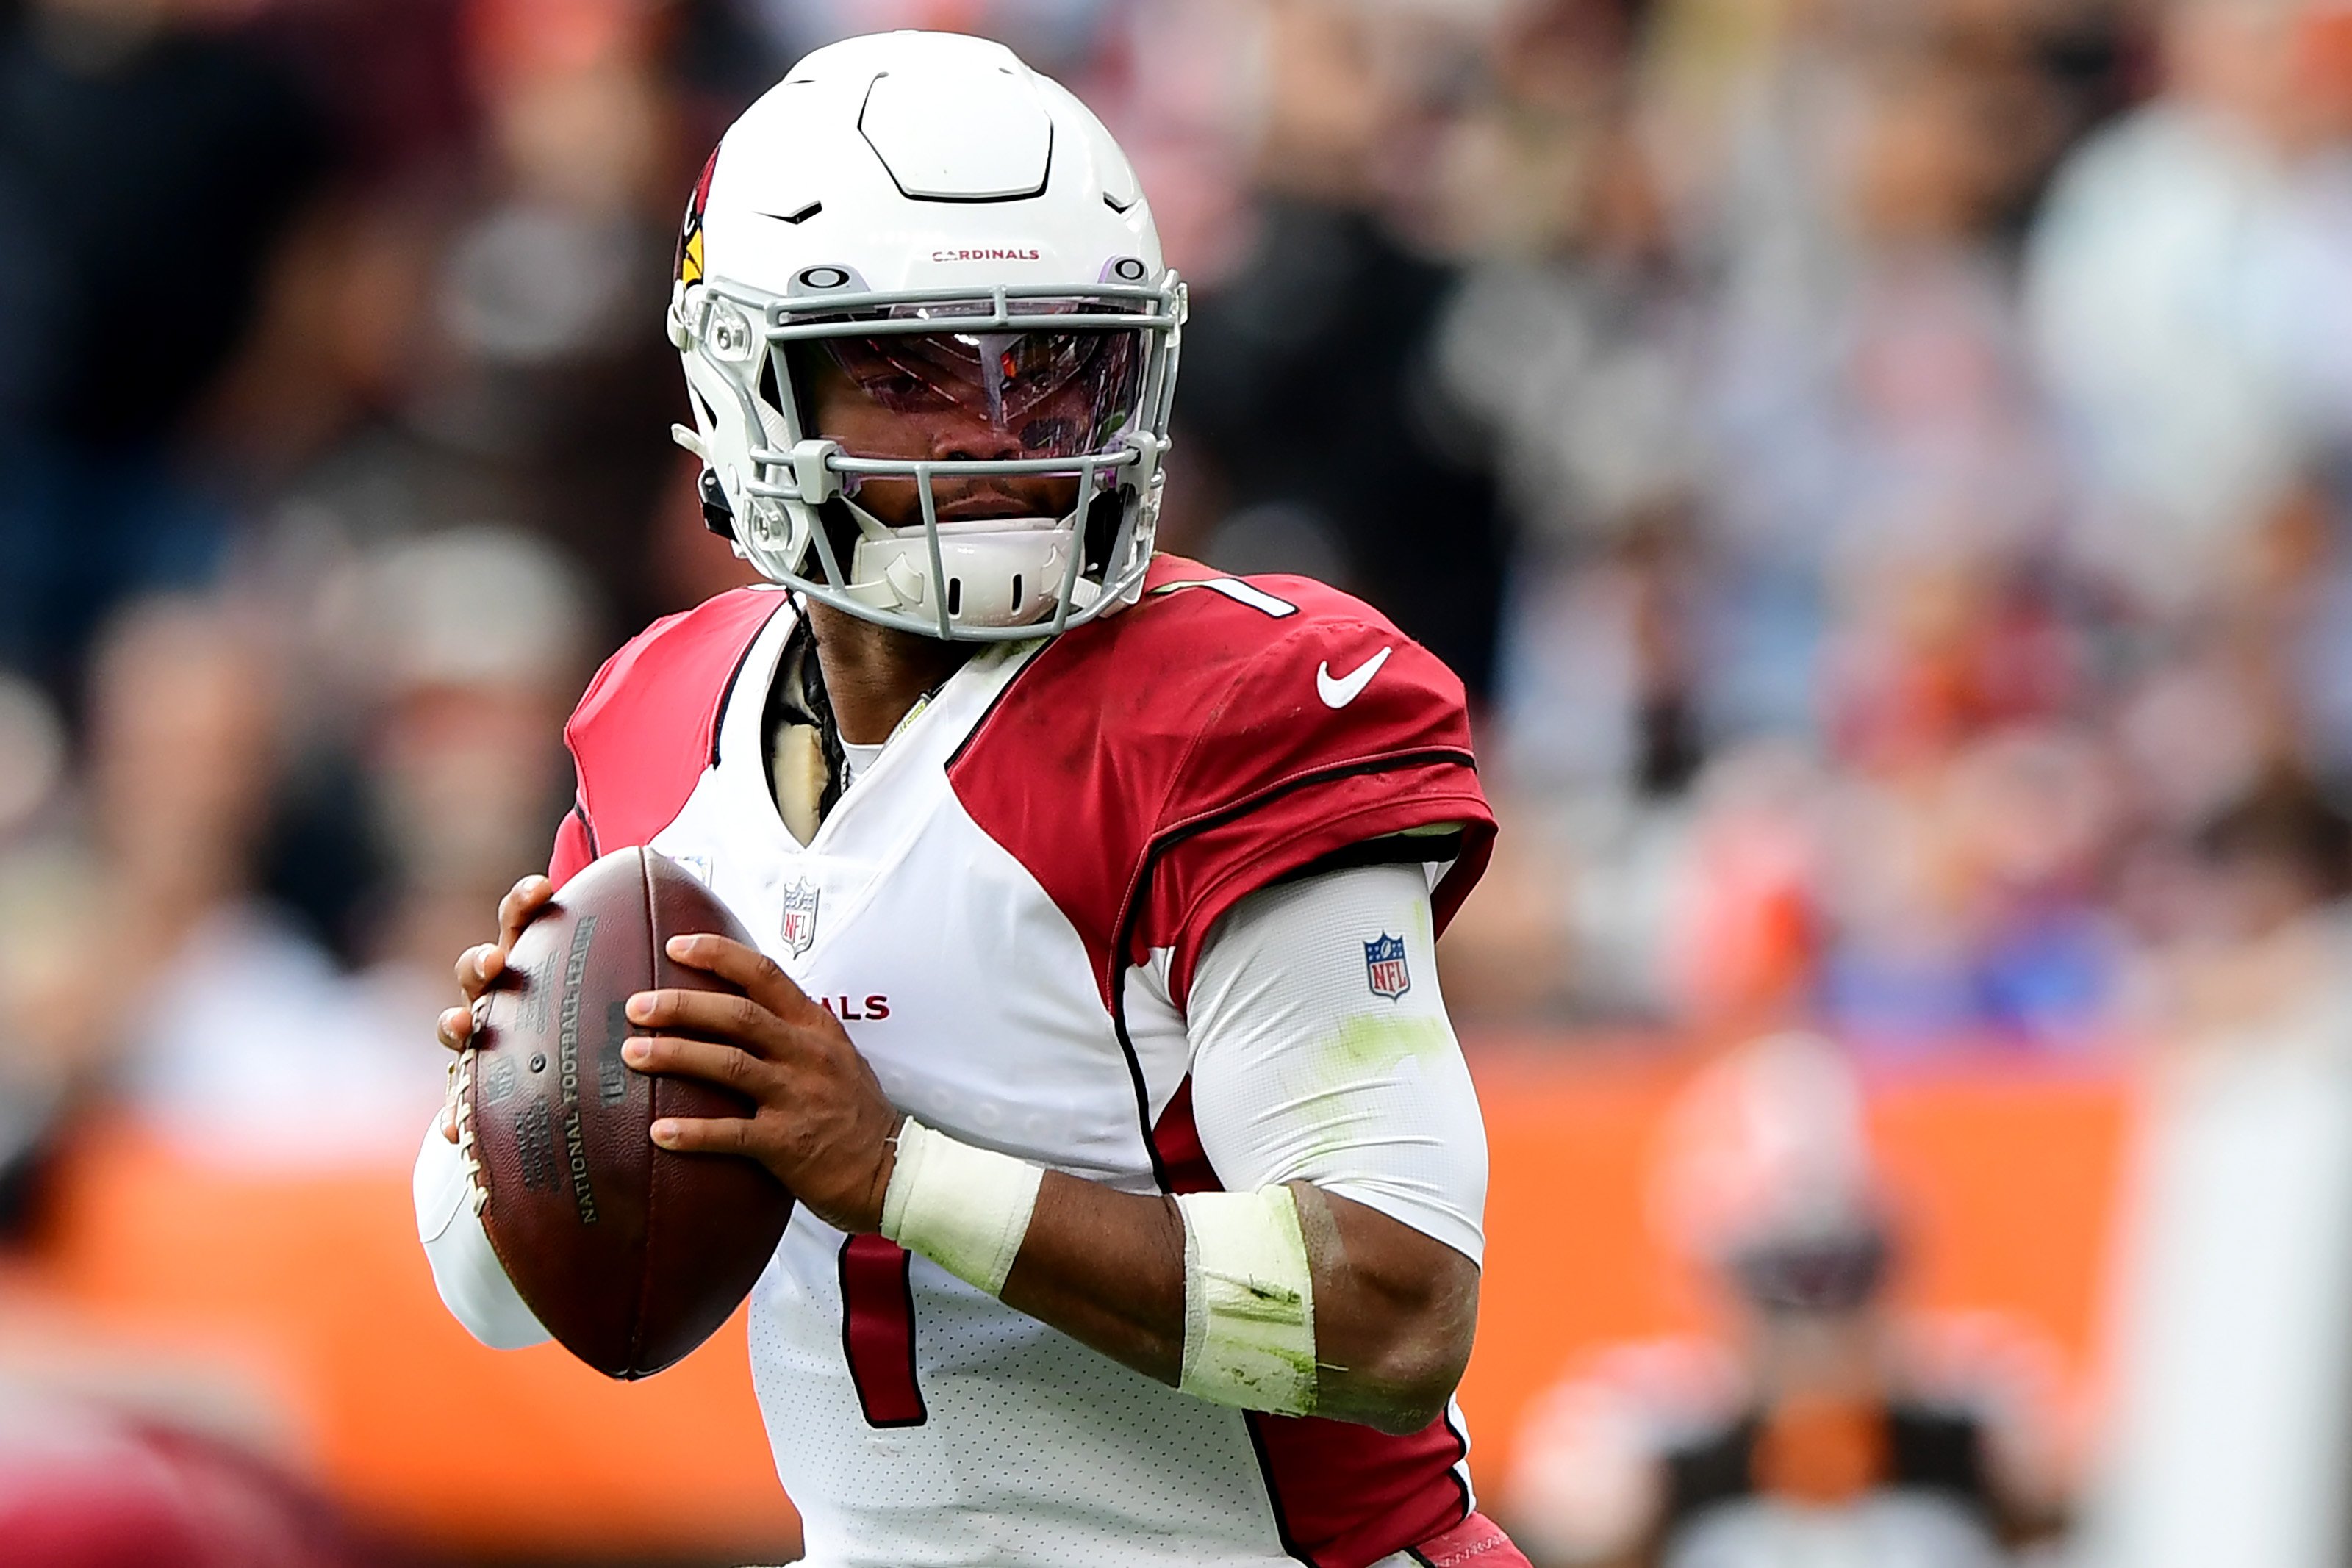 Kyler Murray #1 of the Arizona Cardinals drops back to pass during a game against the Cleveland Browns at FirstEnergy Stadium on October 17, 2021